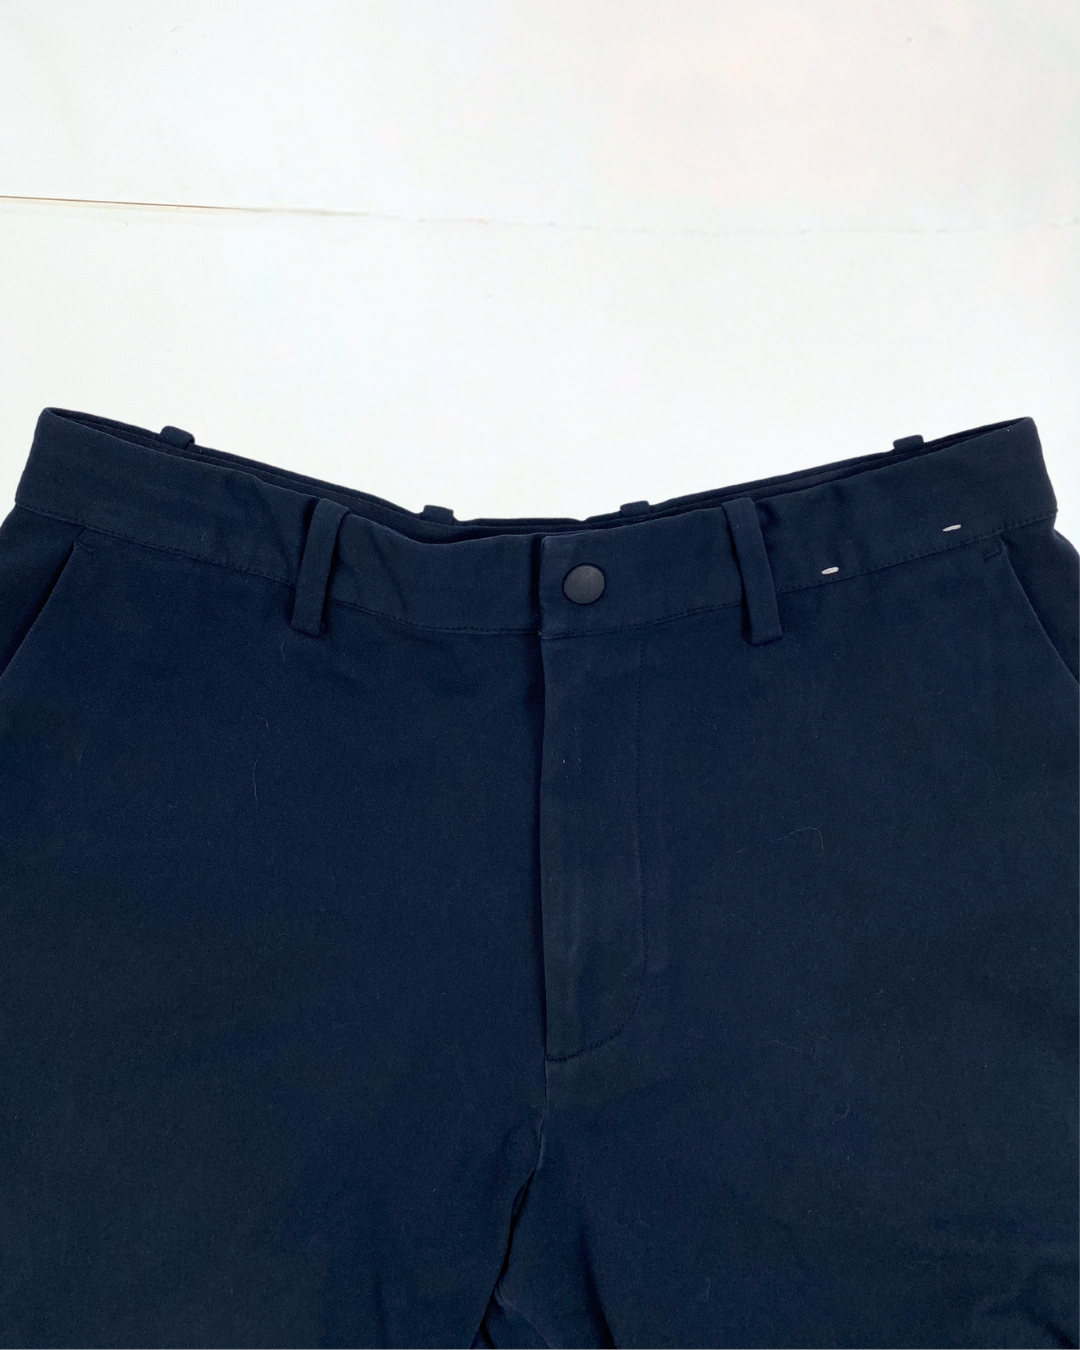 Uniqlo Navy Stretchy Trousers Size S